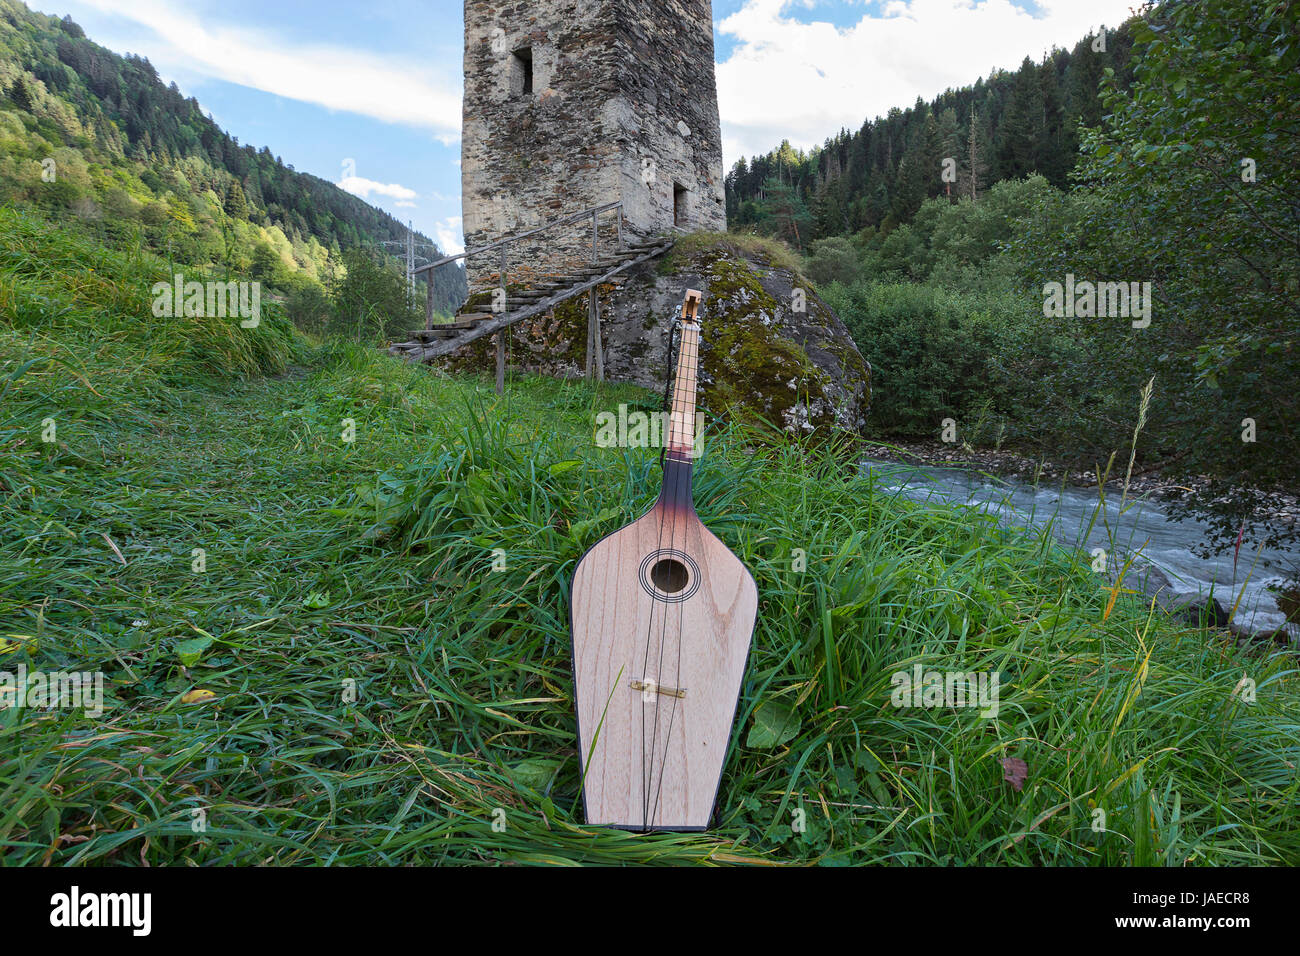 Georgian national musical instrument of Panduri with a medieval tower in the background, in the Svaneti region of the Caucasus Mountains, in Georgia. Stock Photo